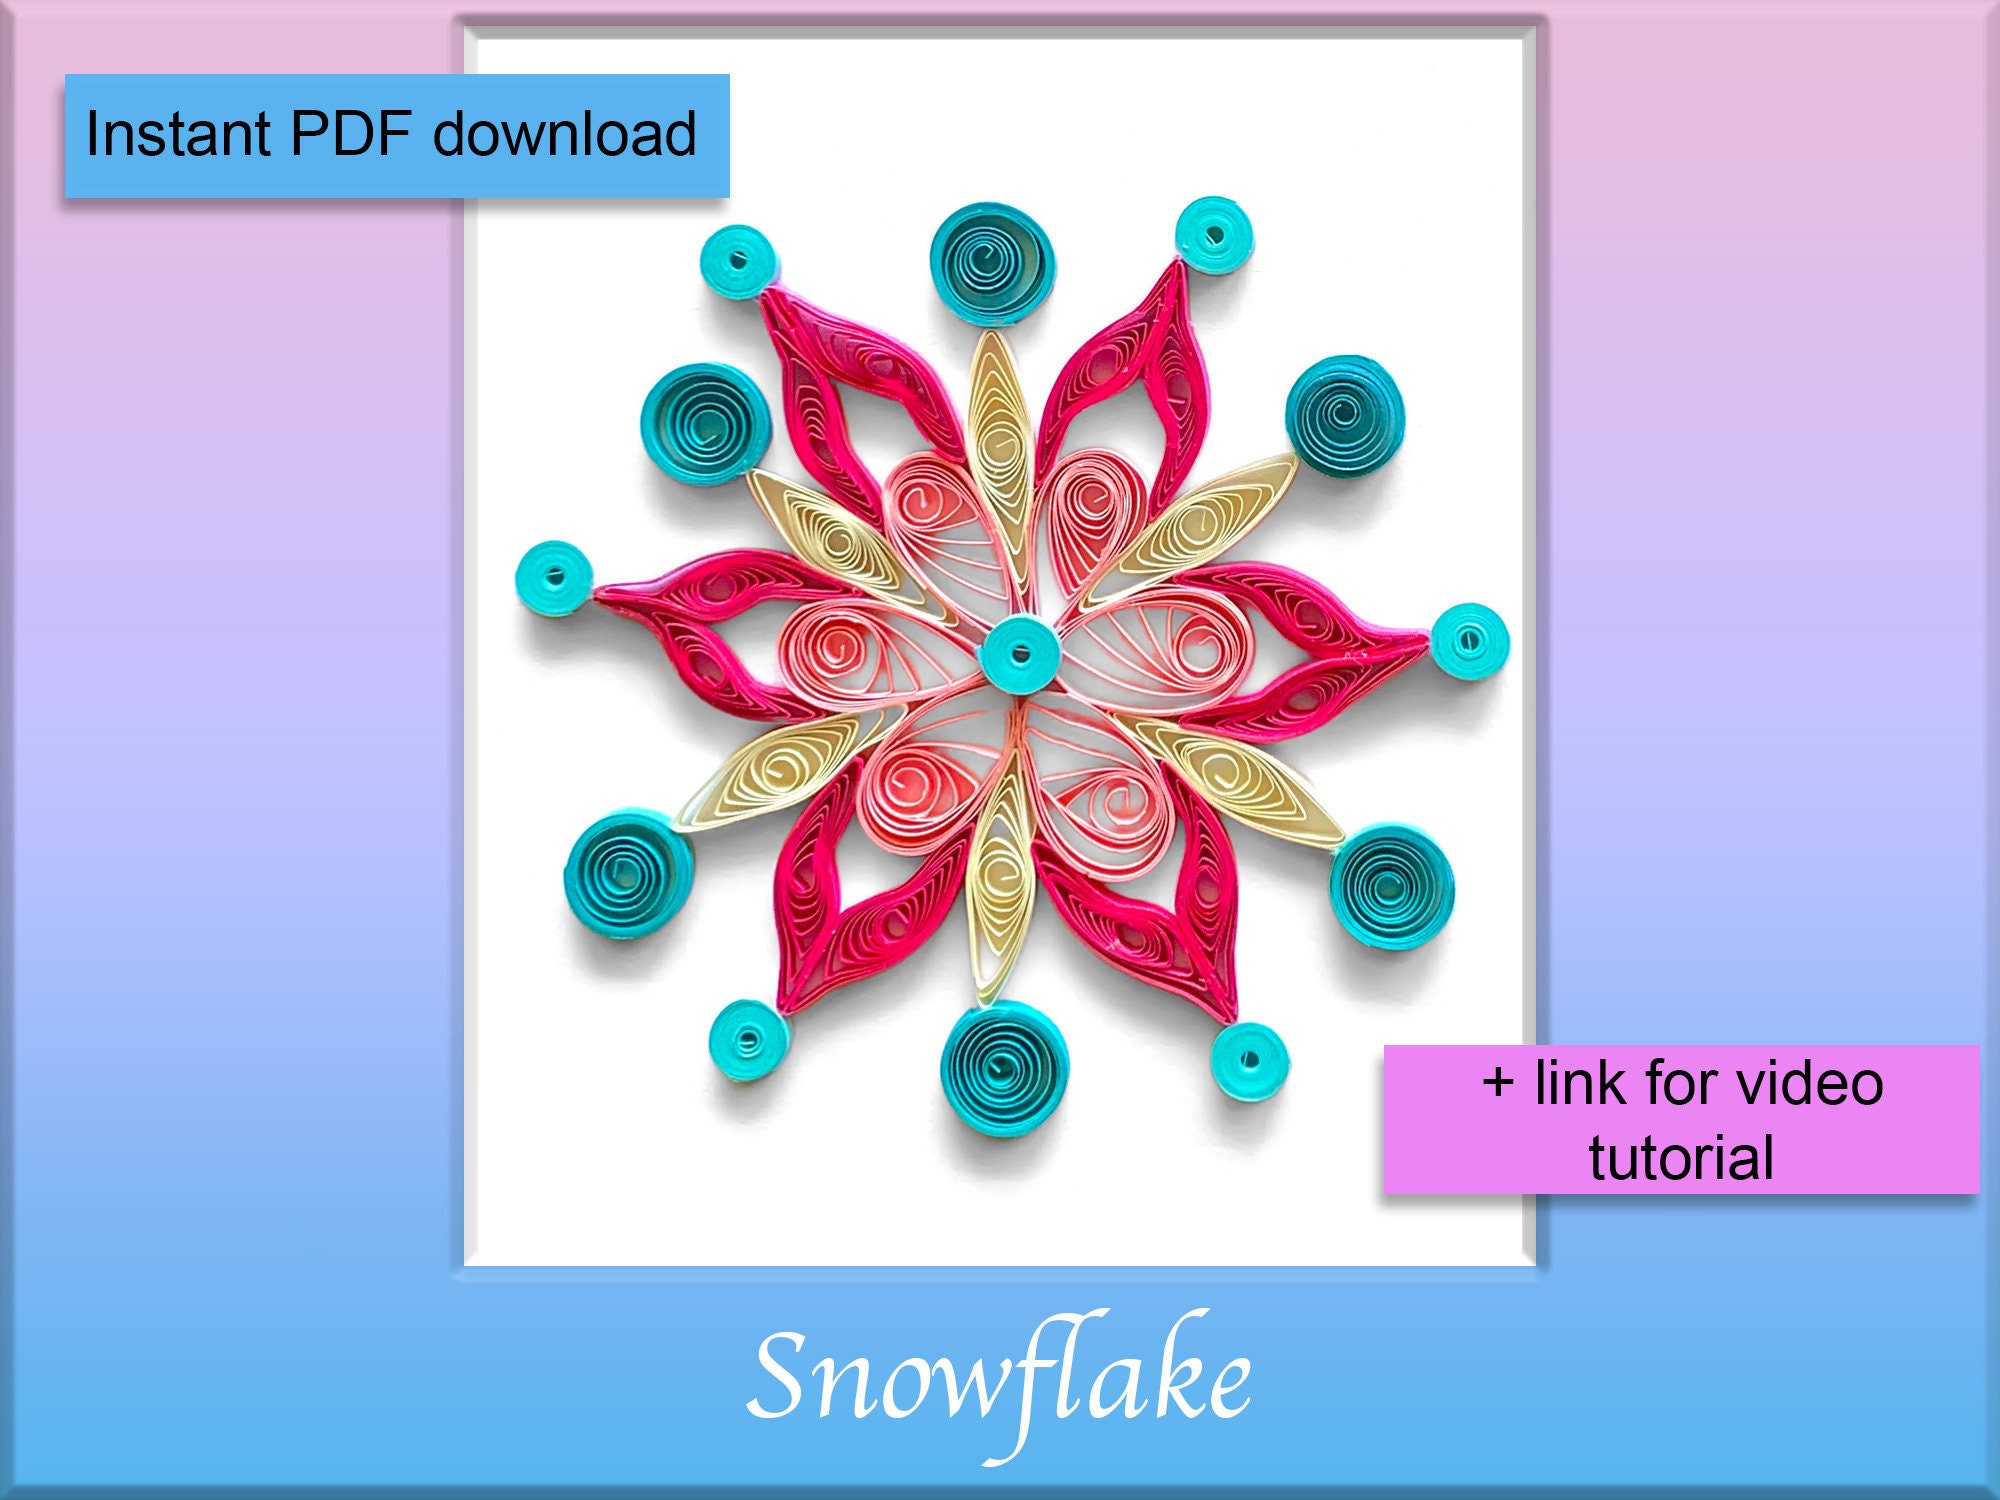 QUILLED CREATIONS SNOWFLAKE THEME QUILLING KIT